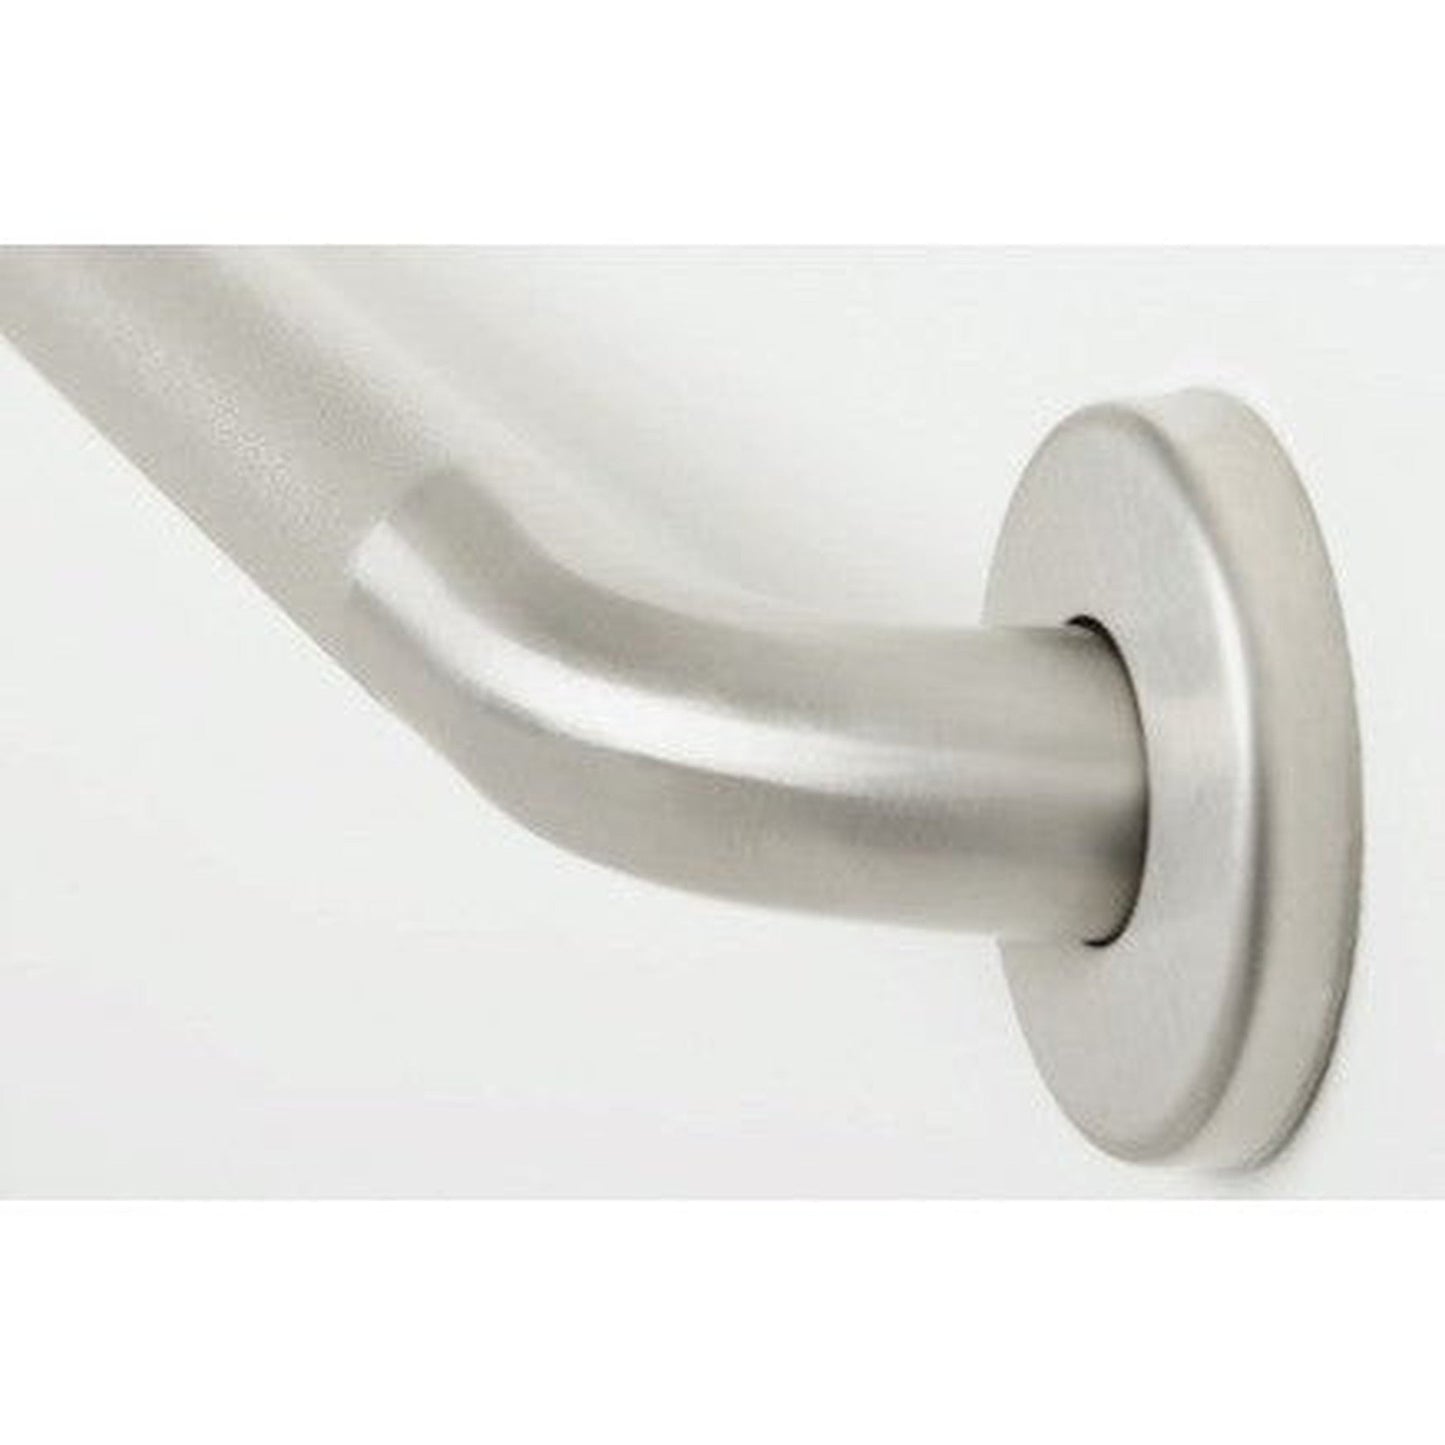 Seachrome Signature GY Series 12" Peened With Satin Stainless Steel Ends 1.25" Tube Diameter Straight Grab Bar